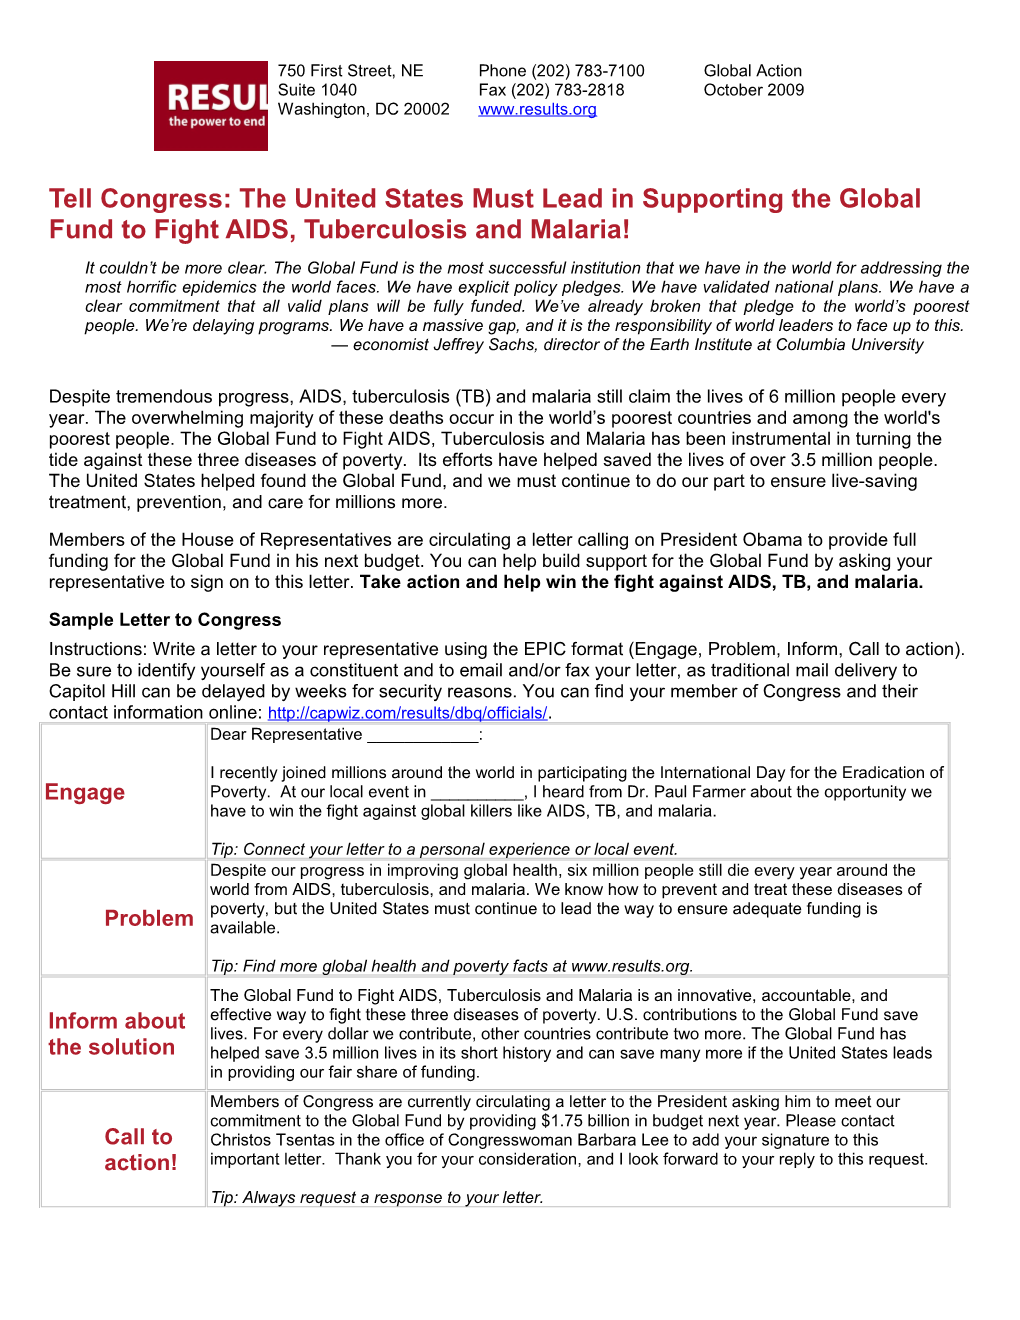 Tell Congress: the United States Must Lead in Supporting the Global Fund to Fight AIDS